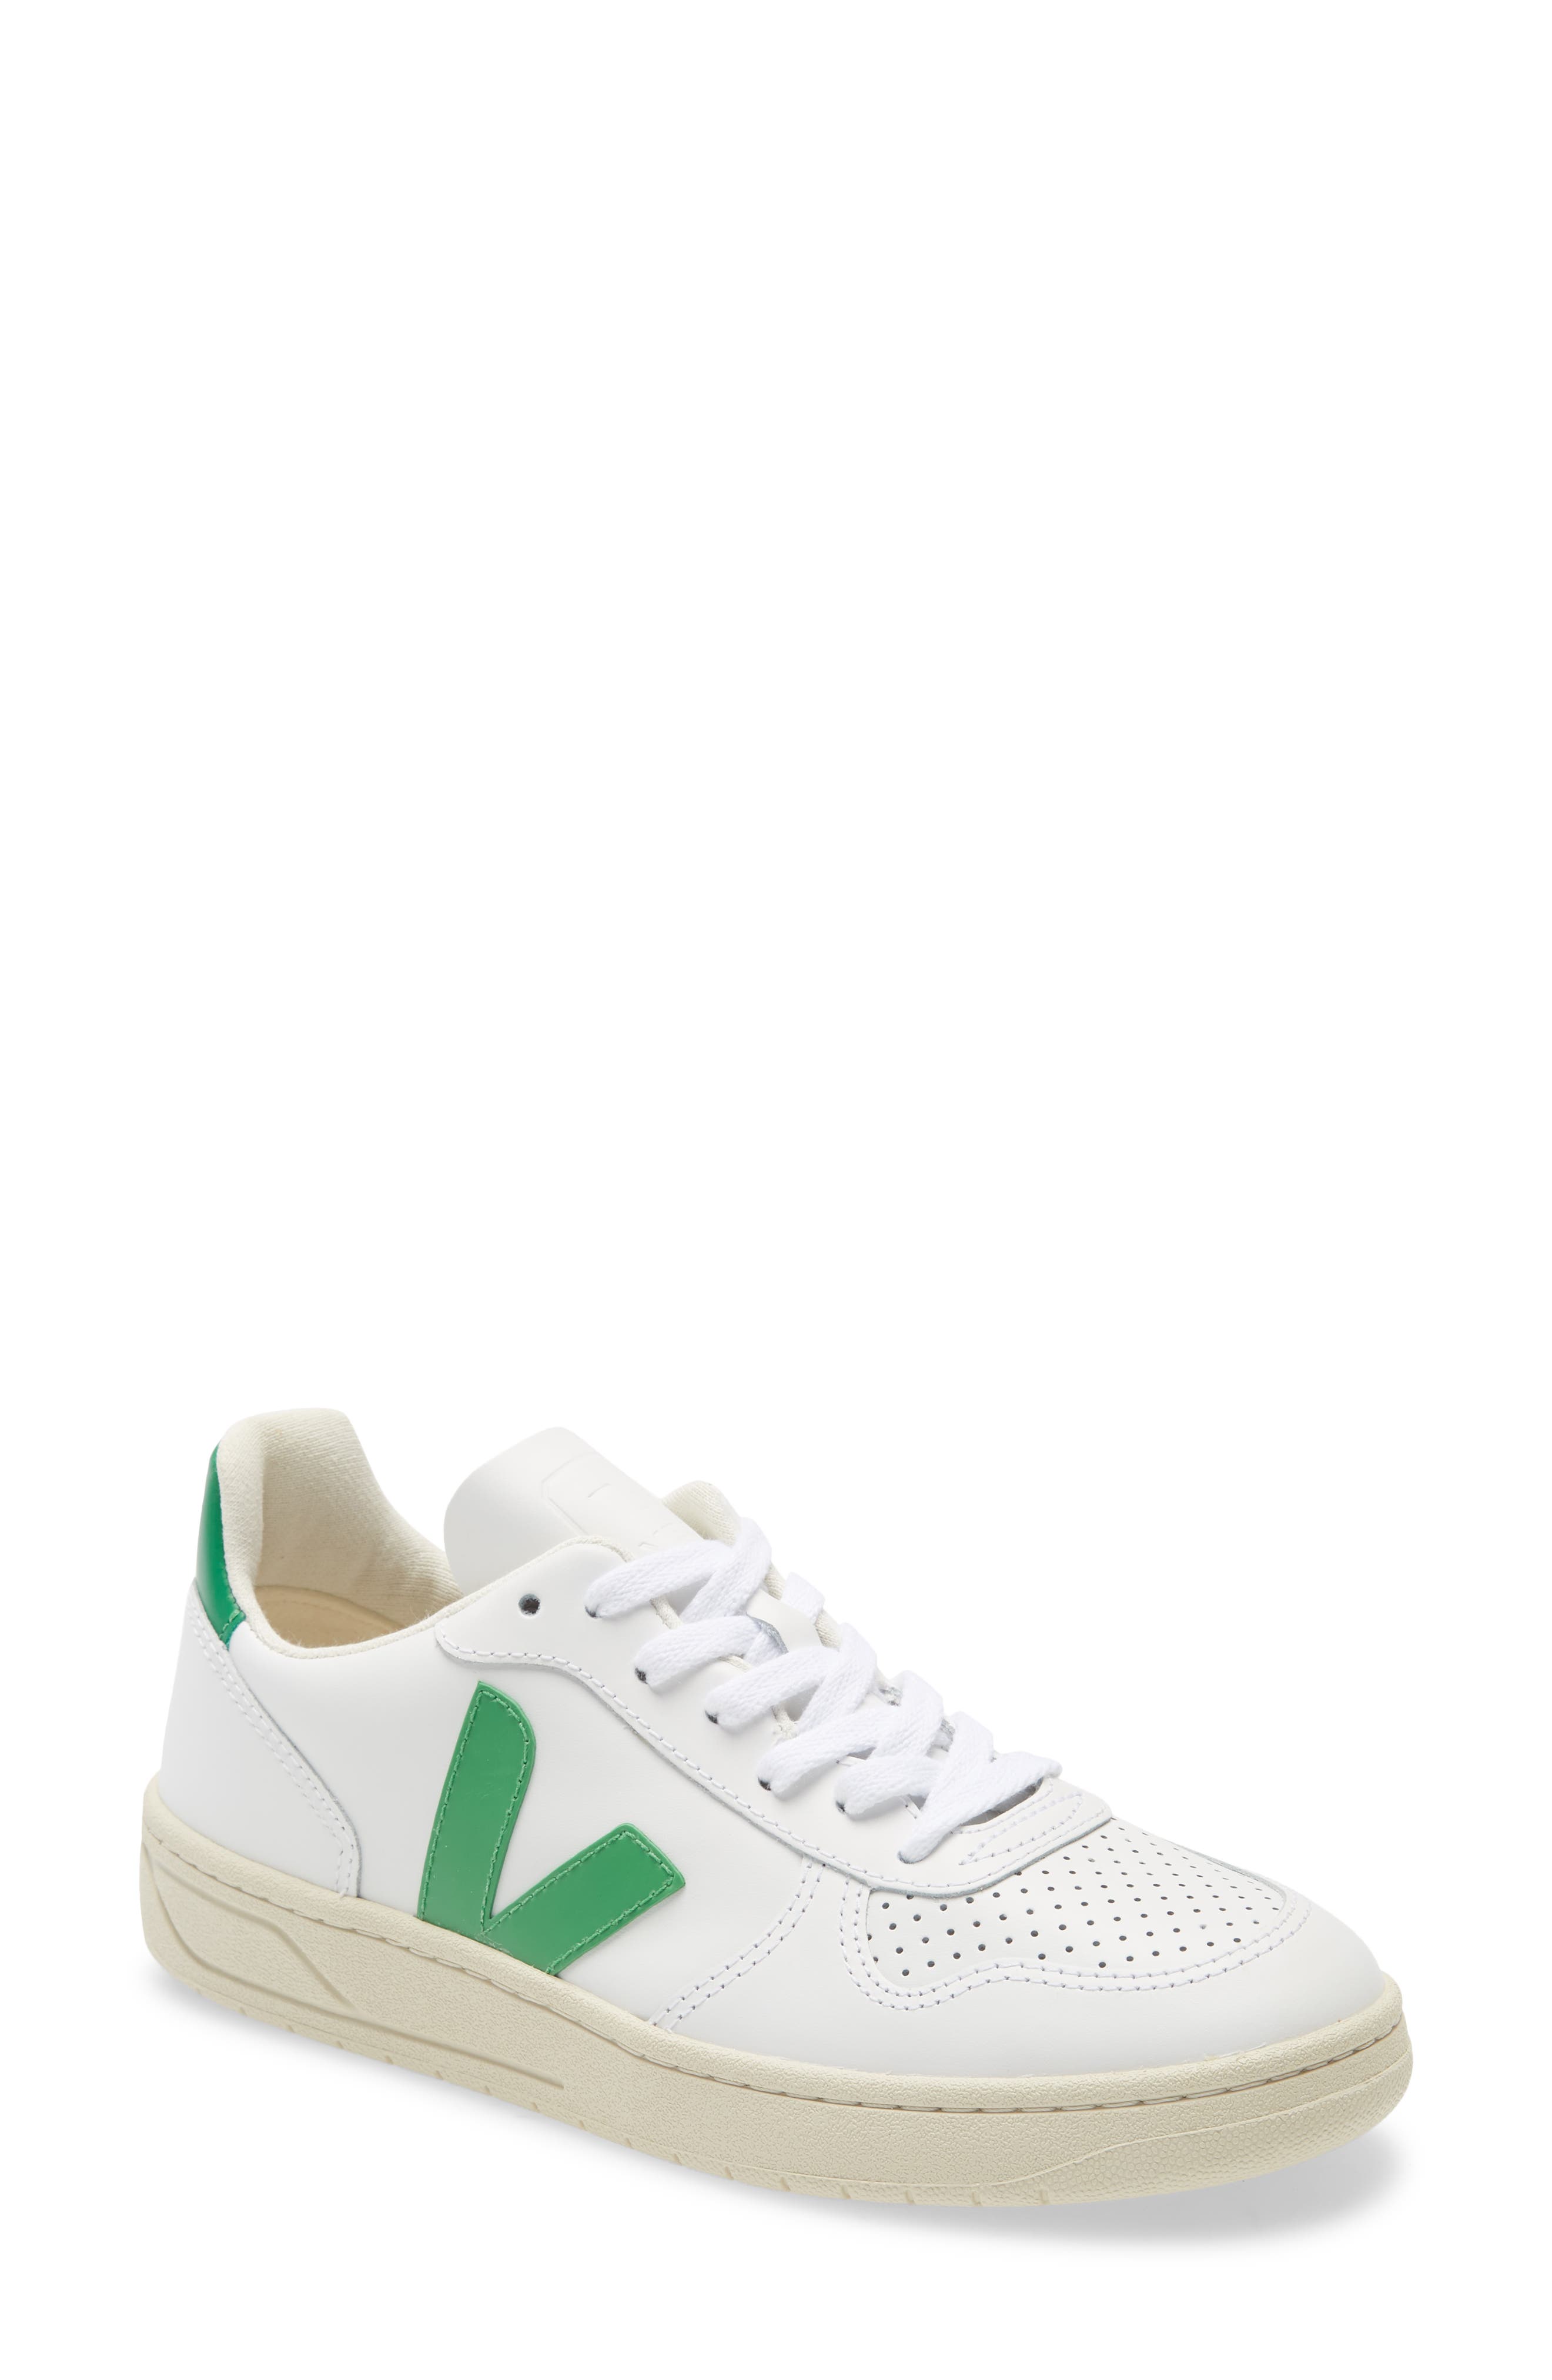 where to buy veja shoes near me